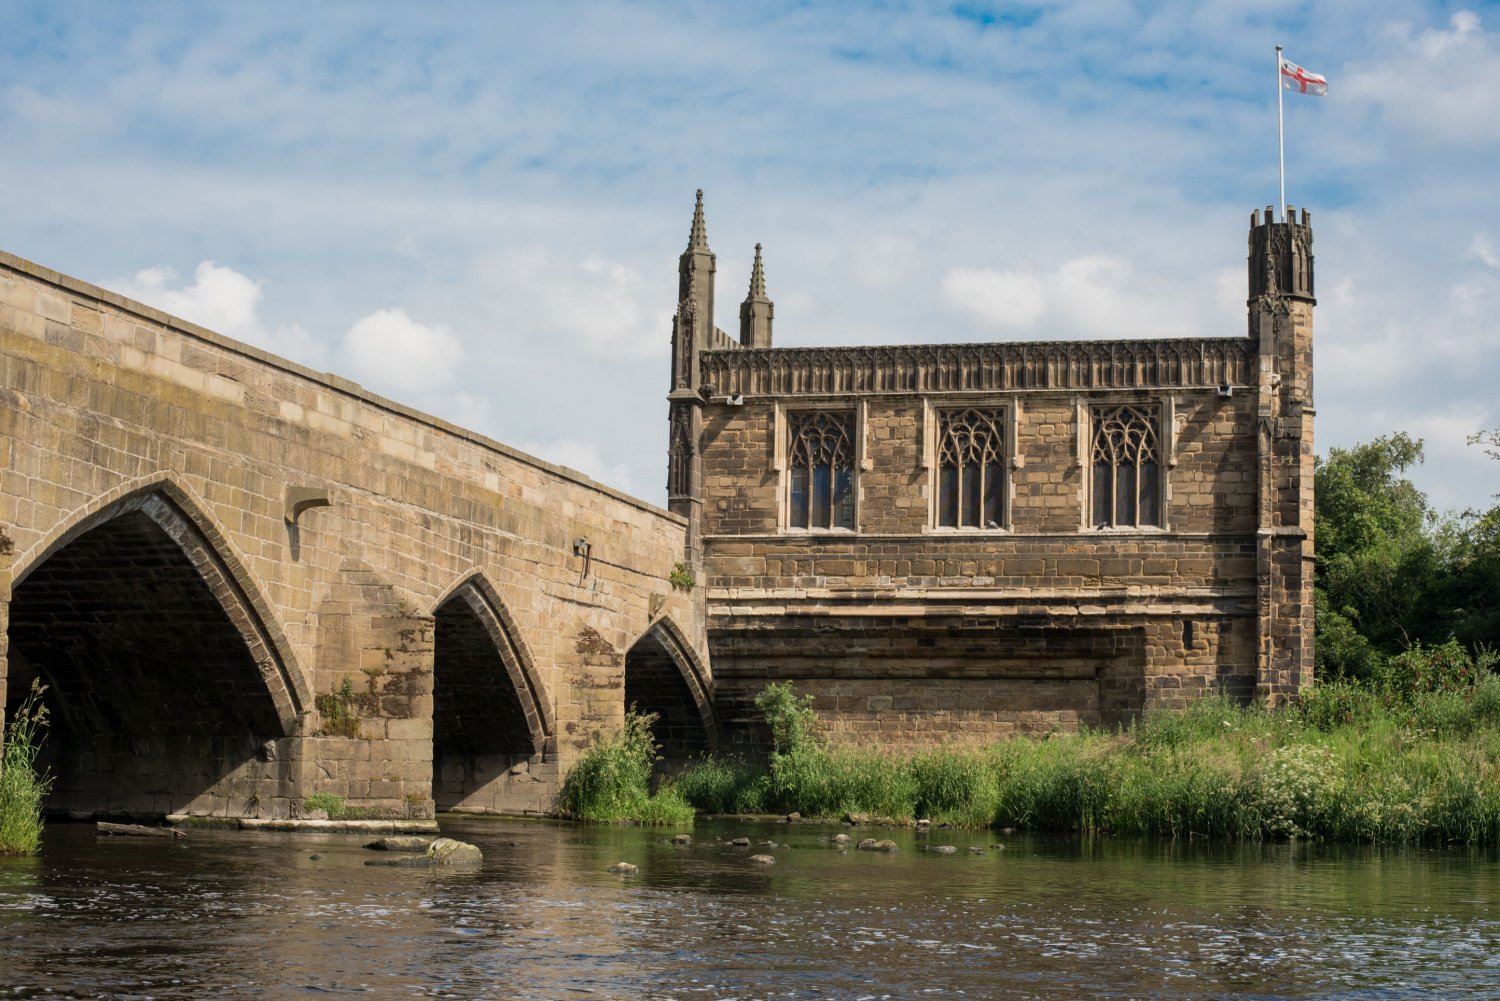 13th century, Grade I listed Chantry Chapel of St Mary the Virgin, part of Wakefield Bridge, Yorkshire, UK